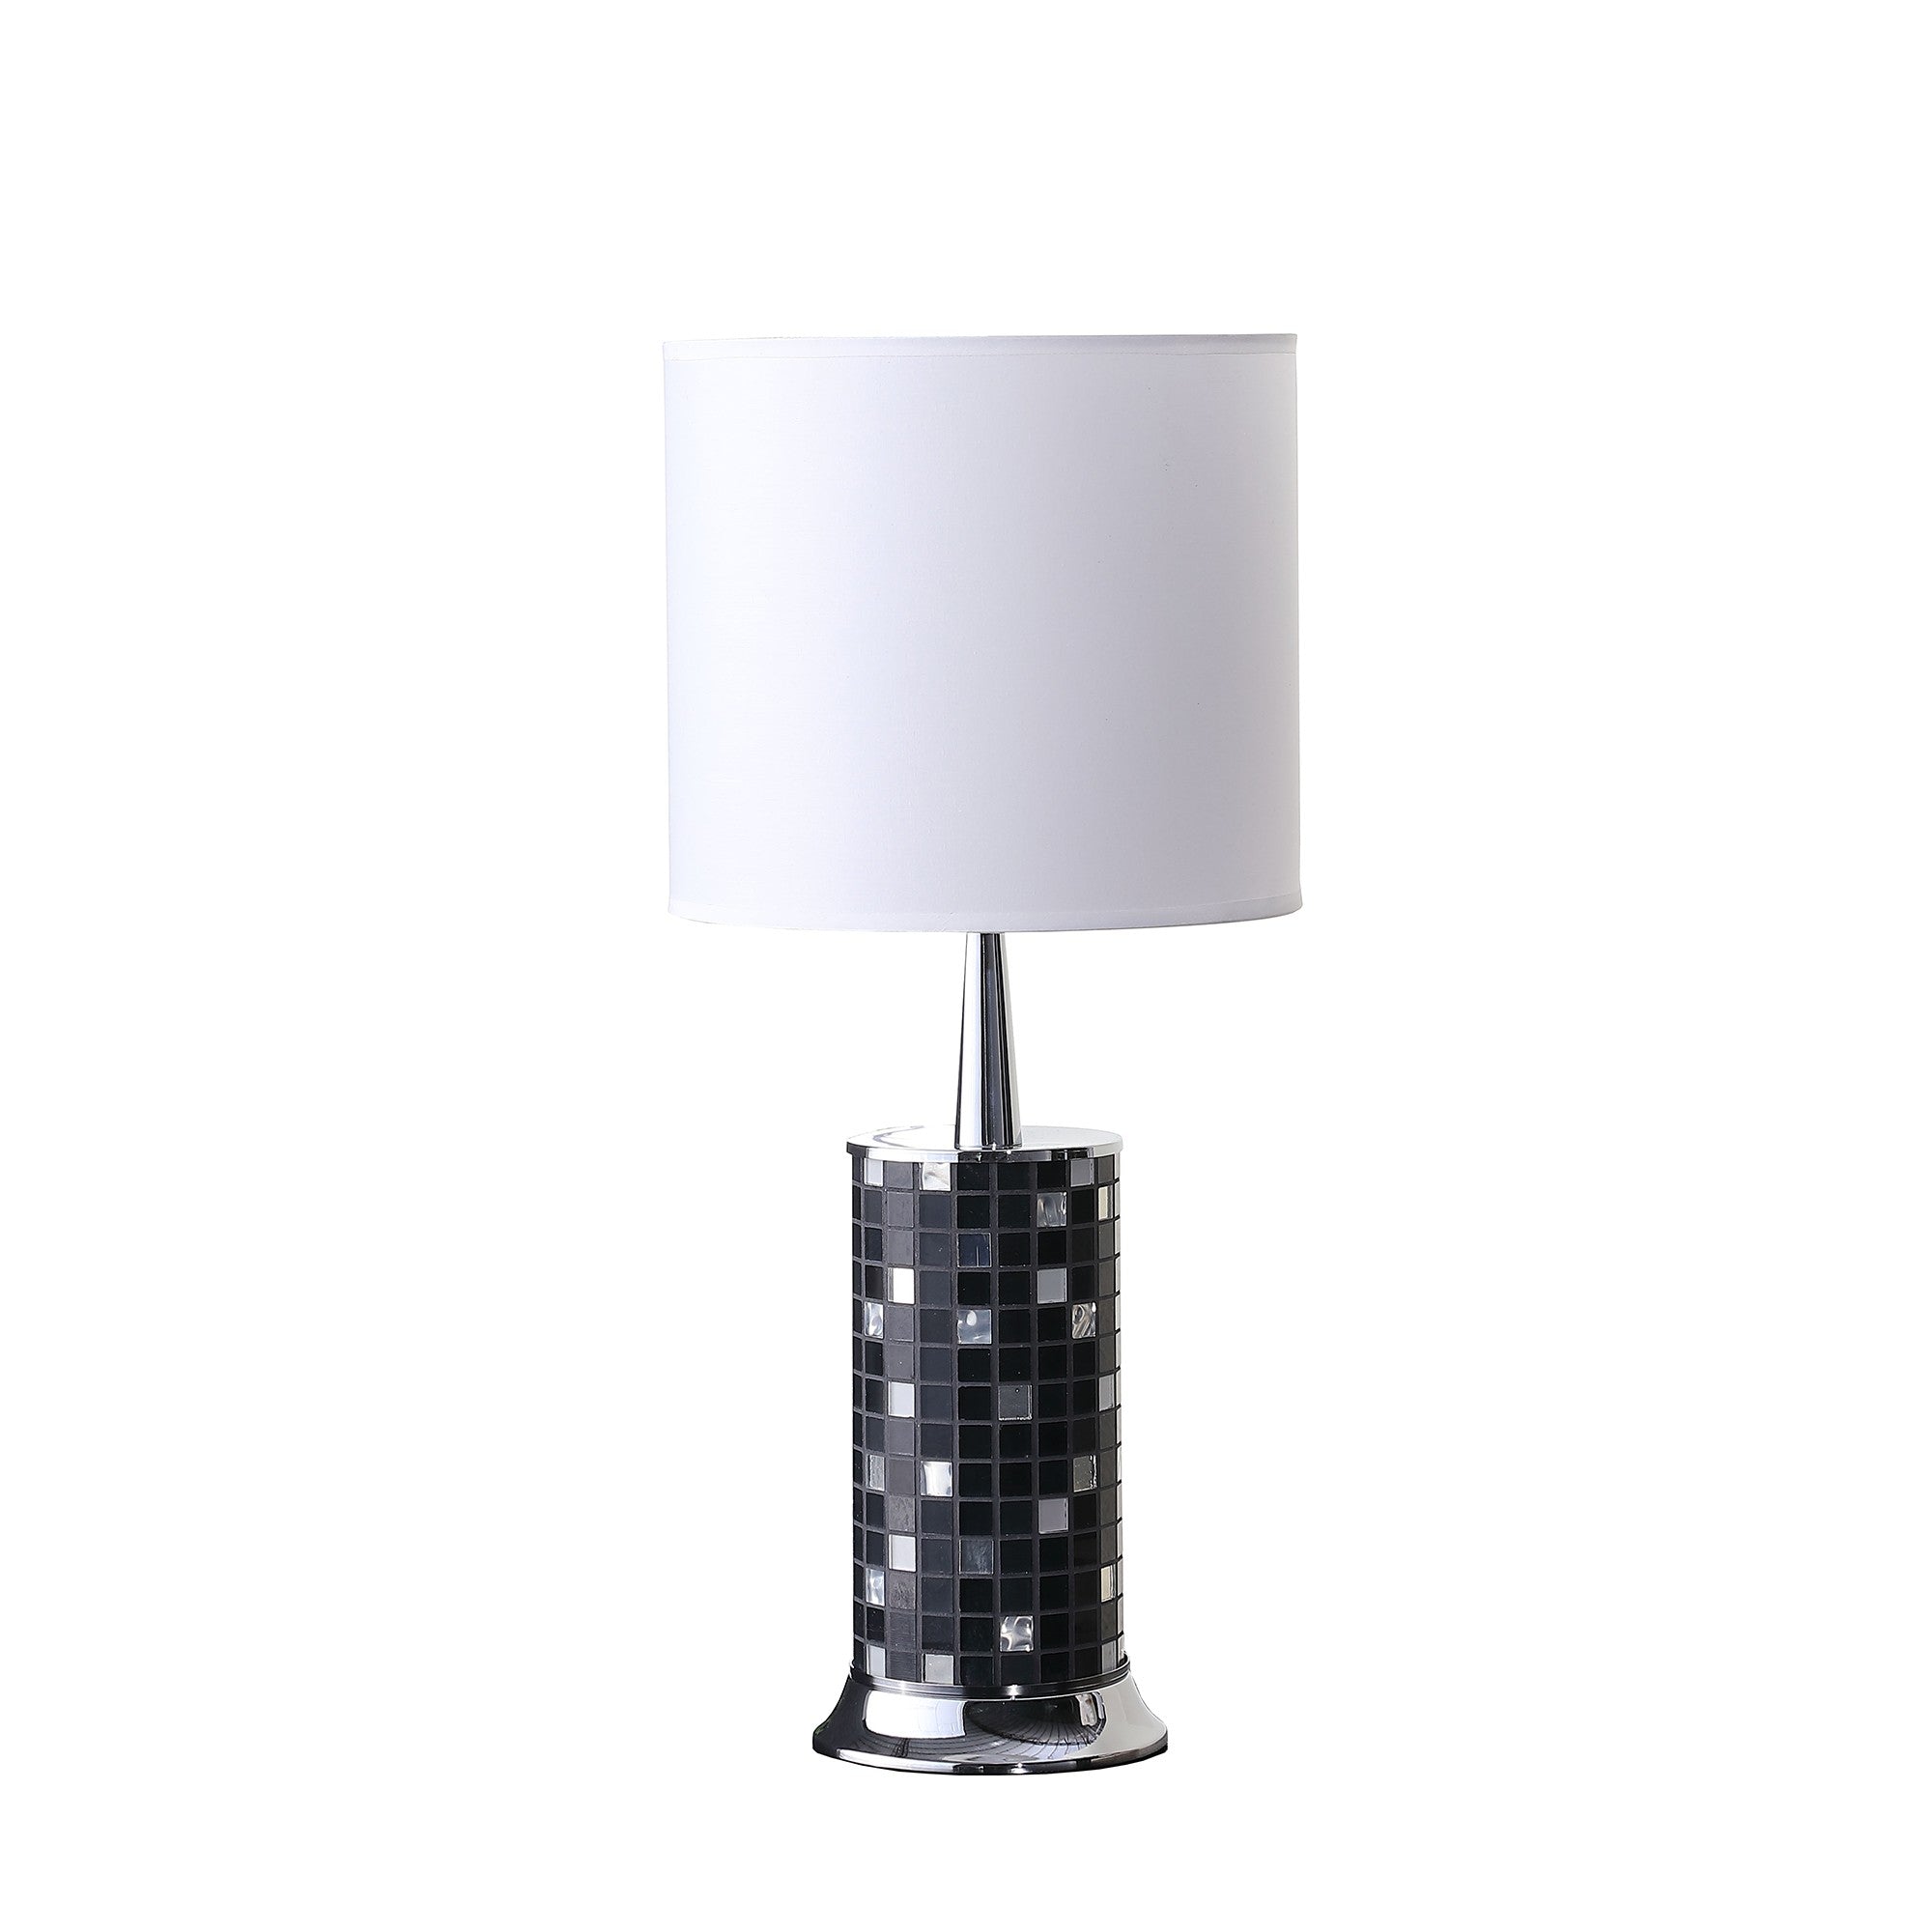 24" Silver Bedside Table Lamp With White Drum Shade - Tuesday Morning-Table Lamps